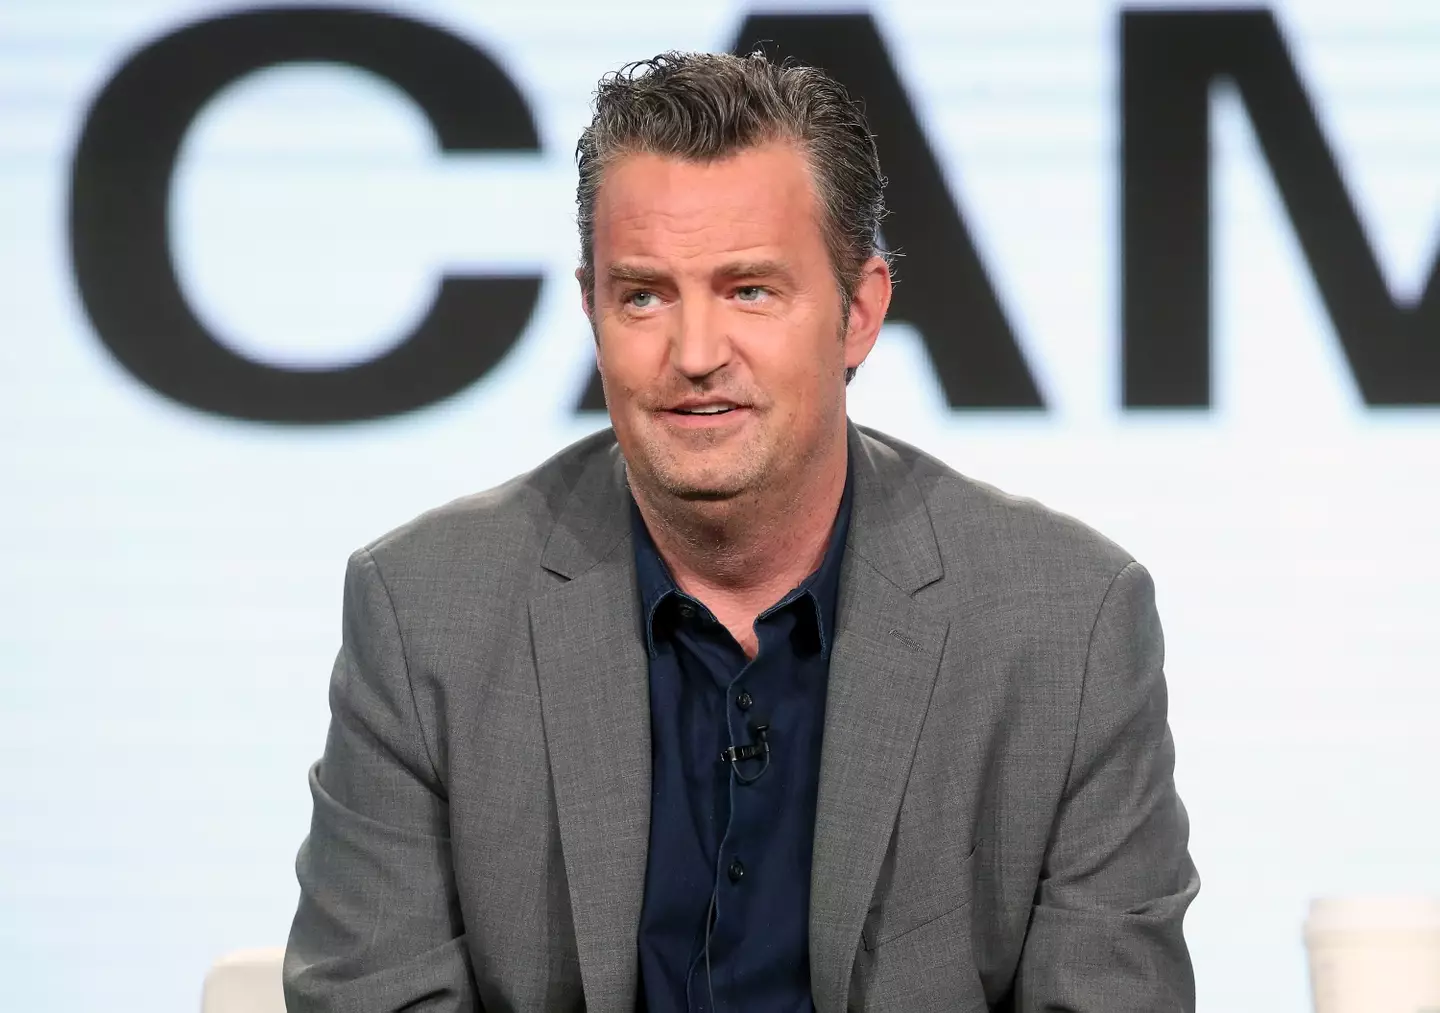 Matthew Perry has died at the age of 54.